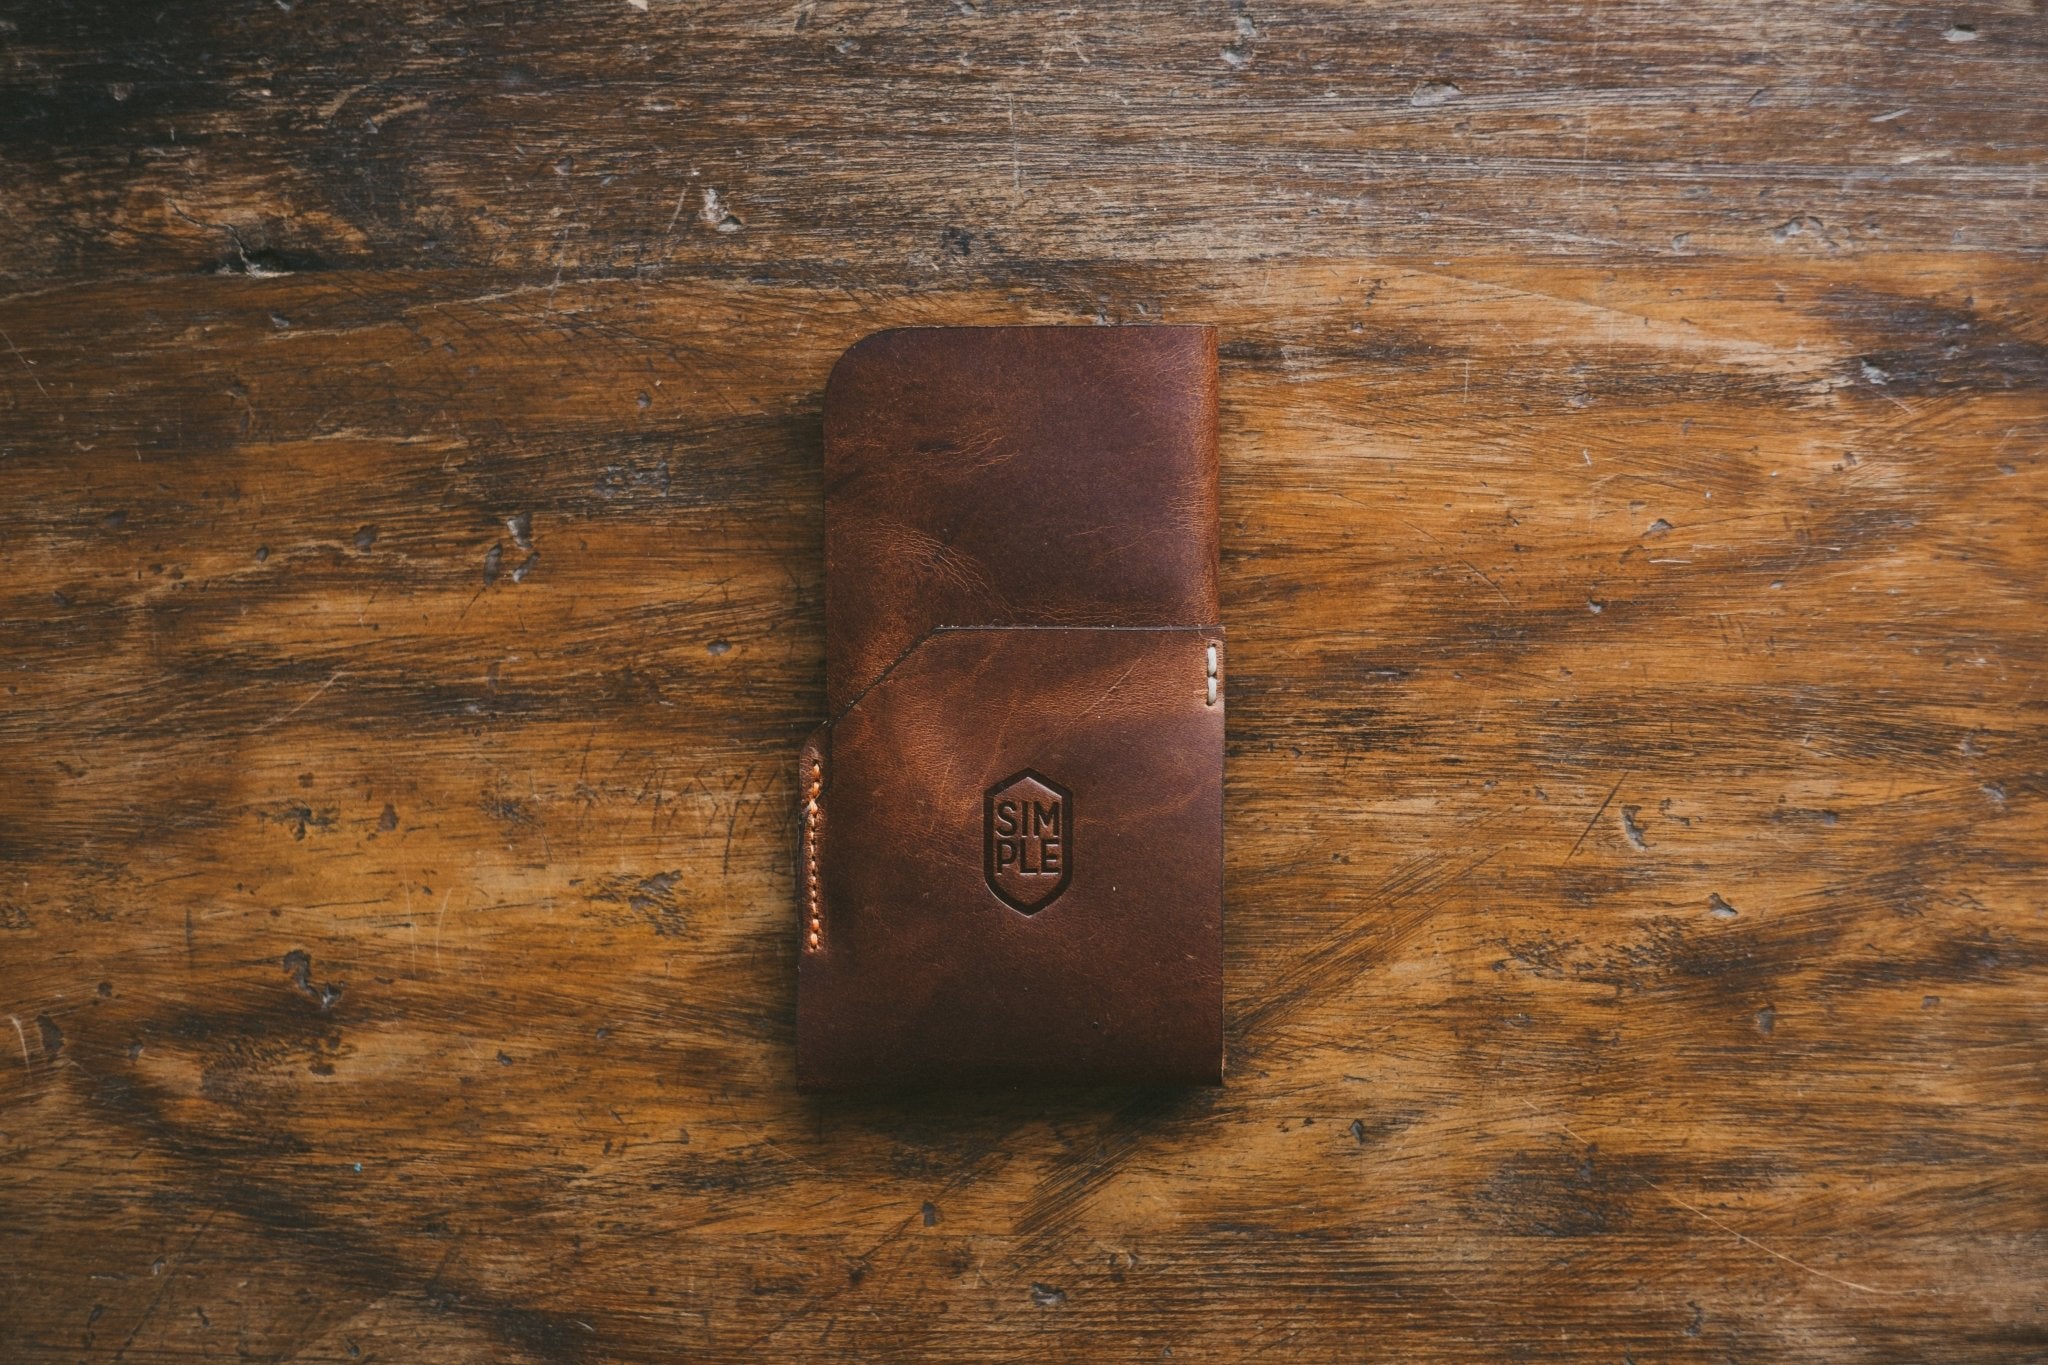 The SE Wallet - SIMPLE Leather Goods